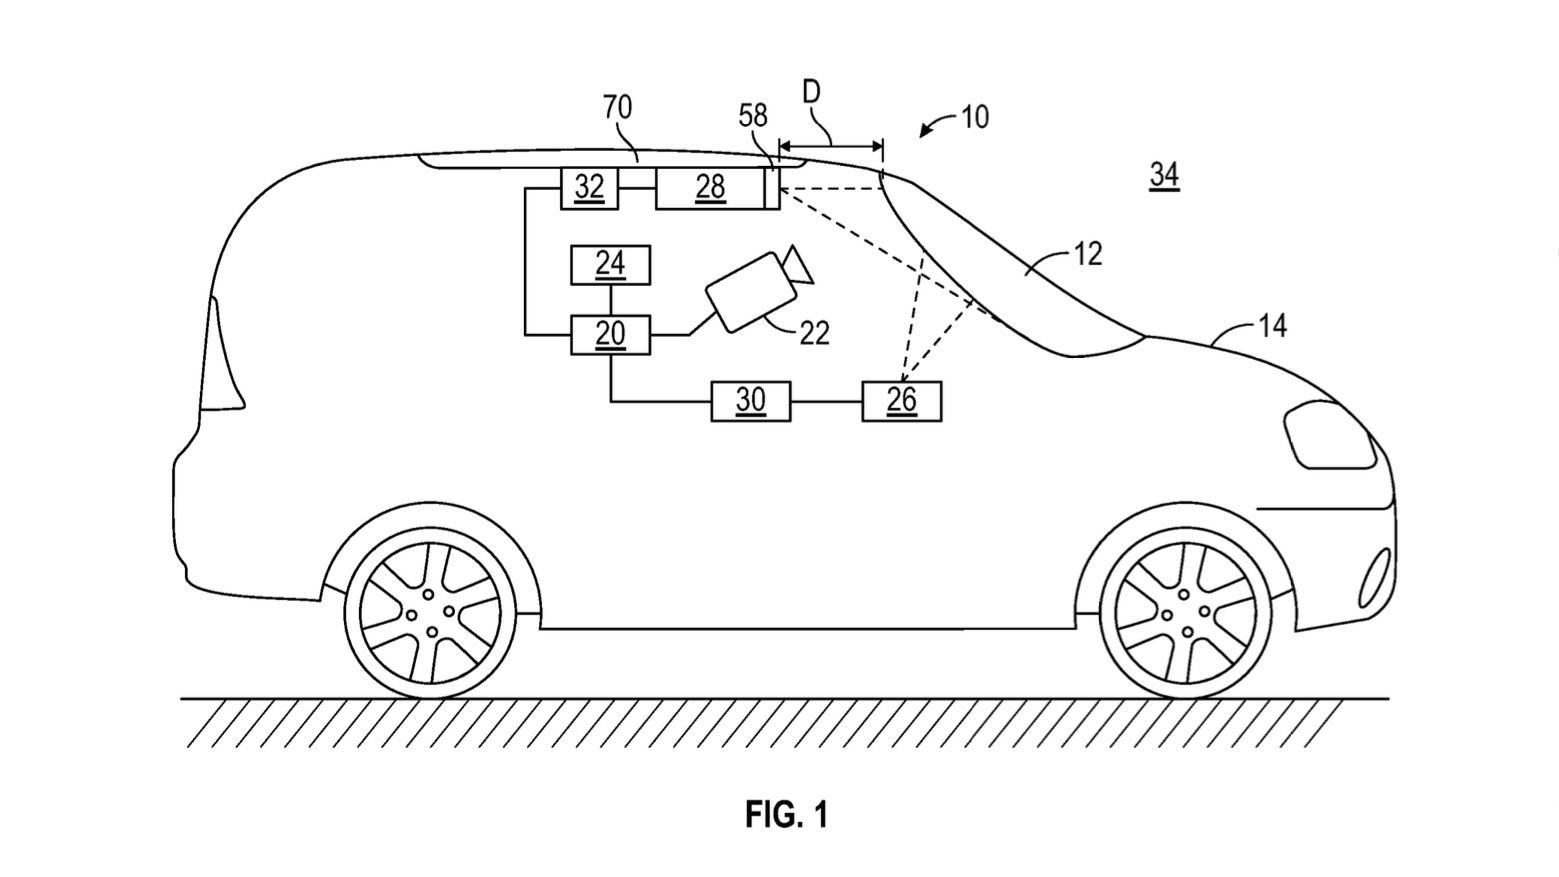 General Motors augmented reality windshield patent image